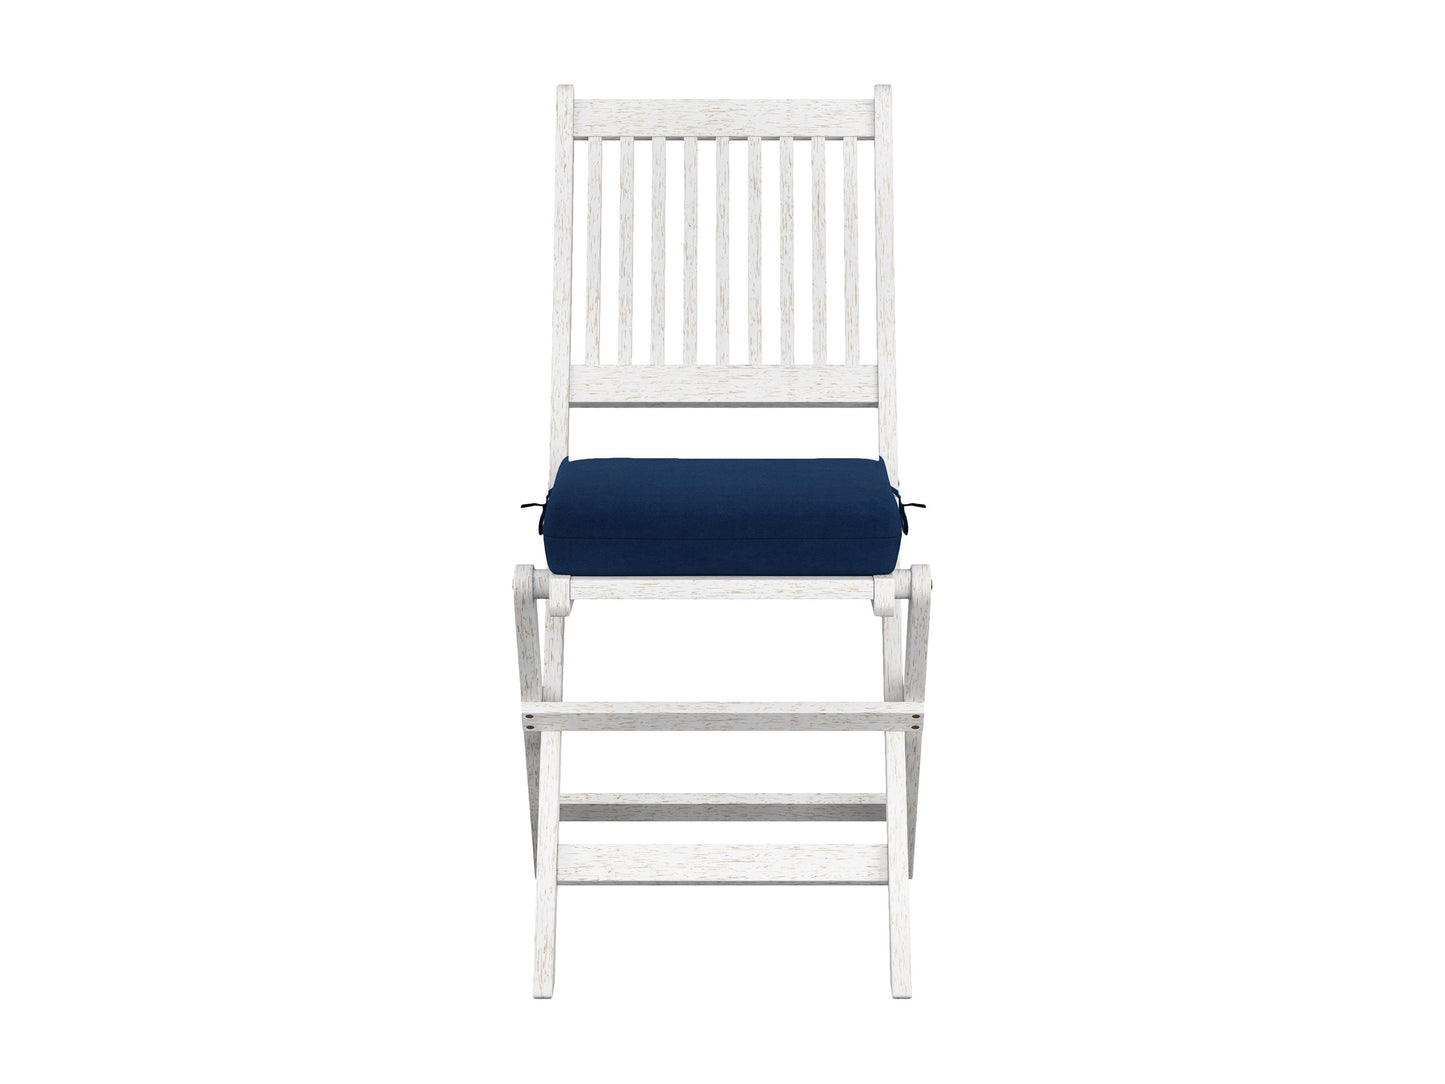 Miramar Washed White Outdoor Wood Folding Chairs, Set of 2 Miramar Collection product image by CorLiving#color_miramar-washed-white